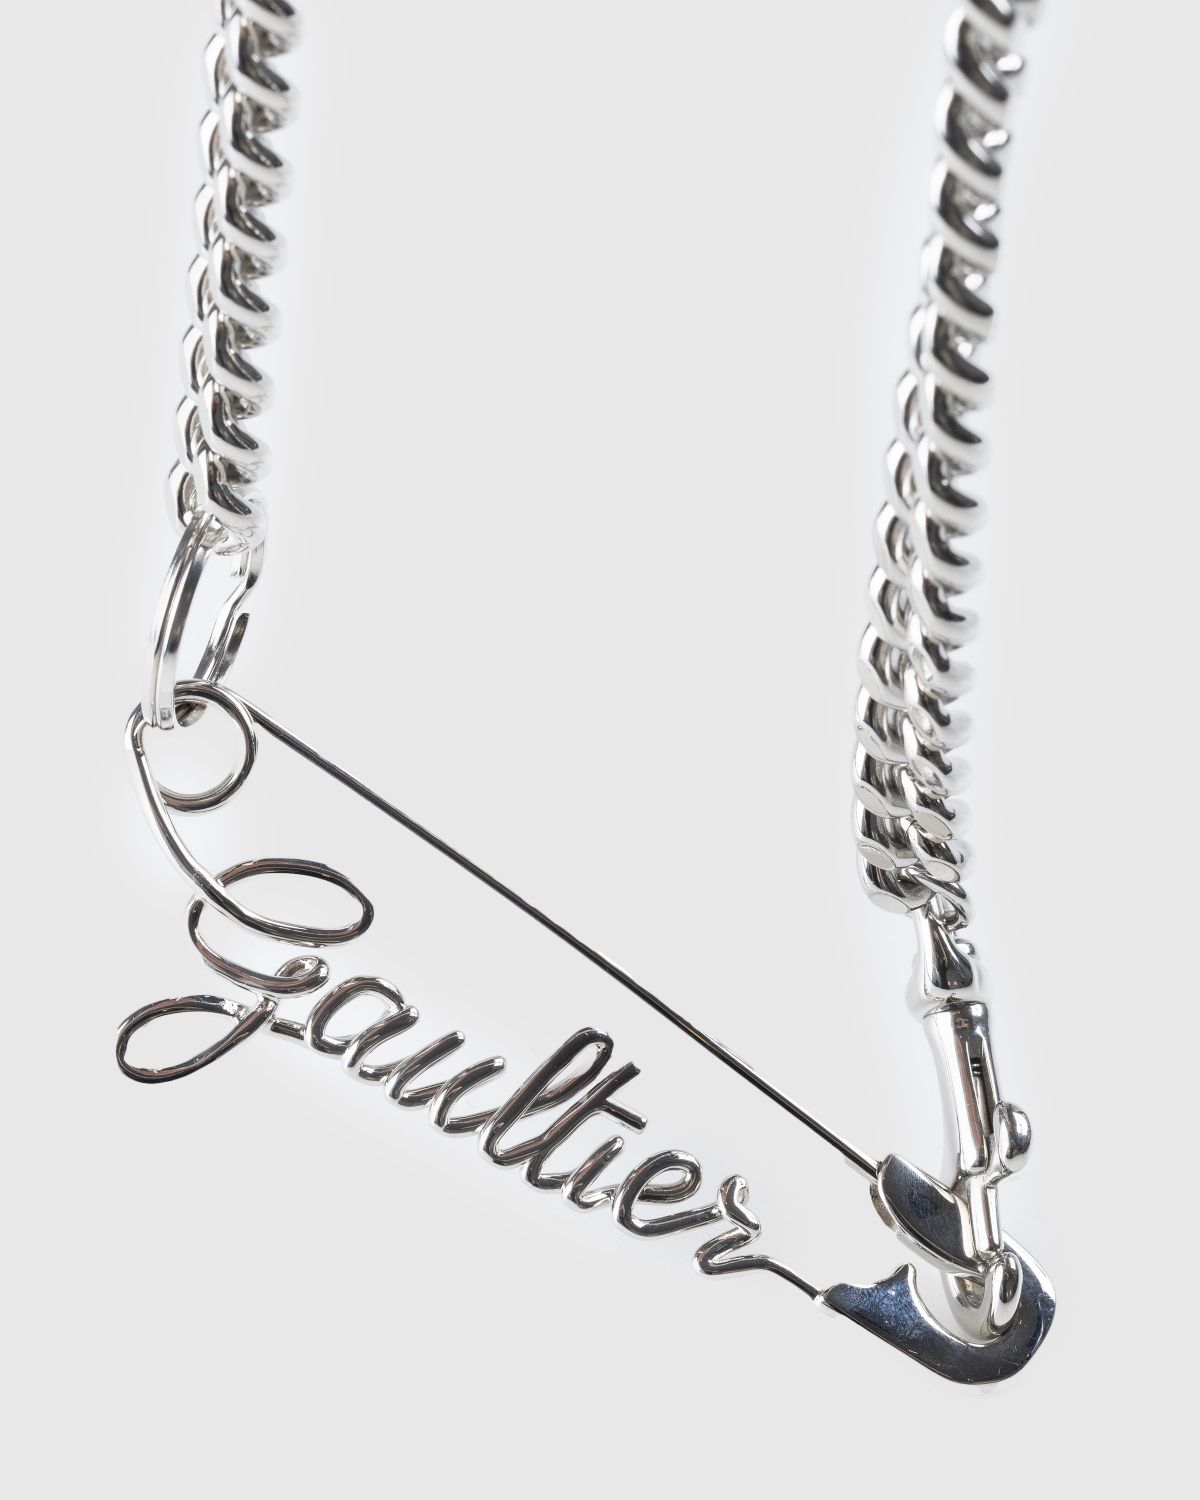 Jean Paul Gaultier – Safety Pin Gaultier Necklace Silver | Highsnobiety ...